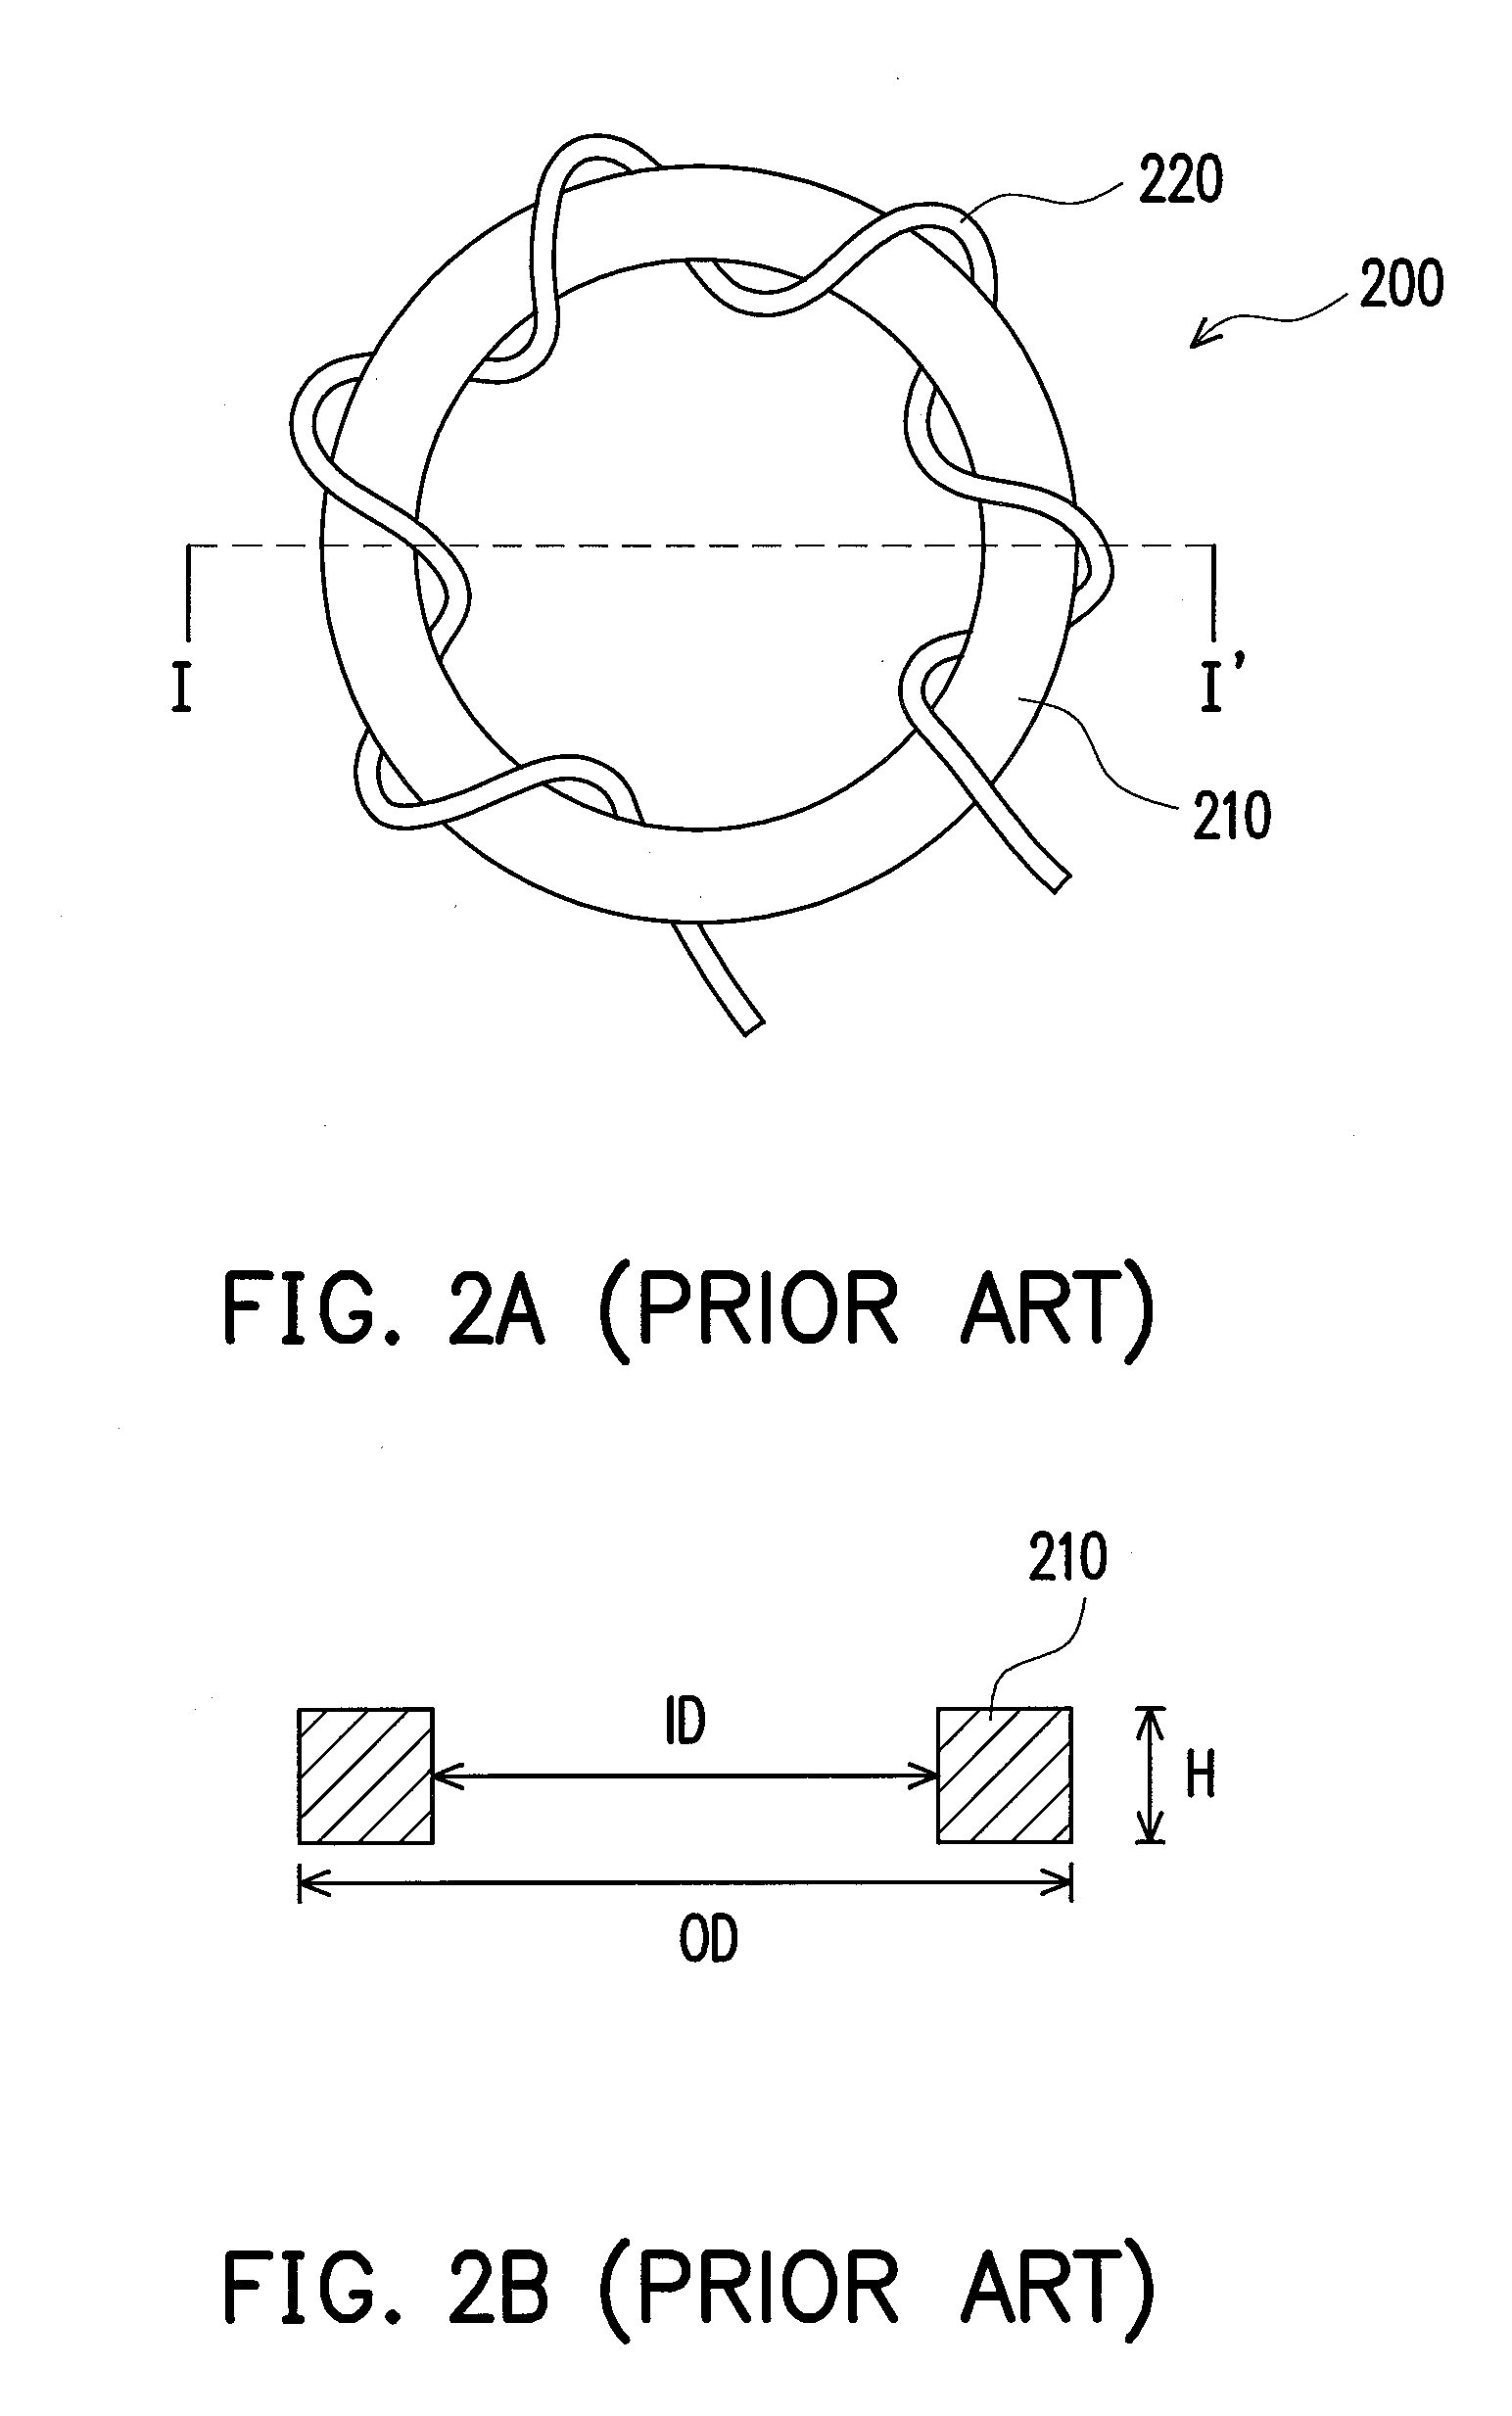 Wire wound type choke coil